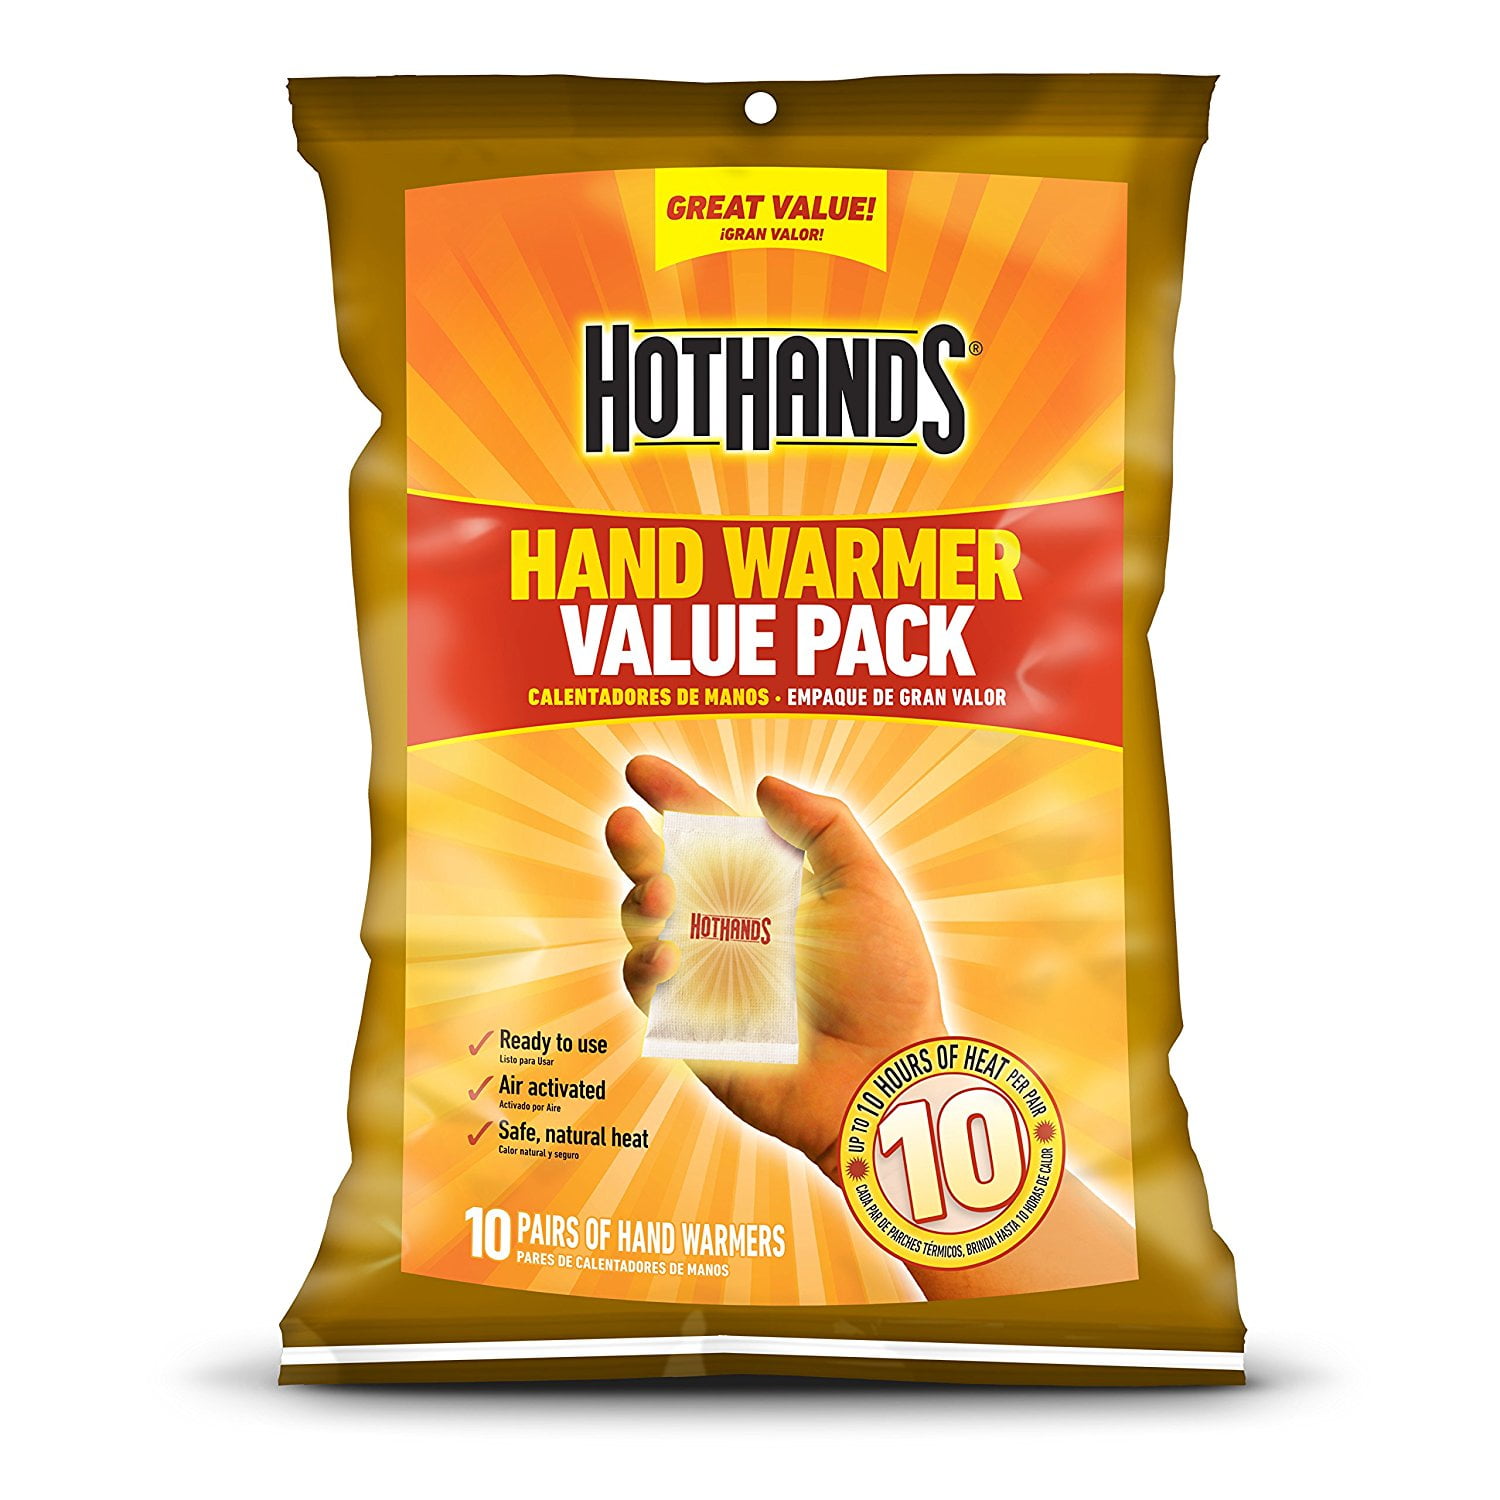 80 TOTAL hot hands hot feet HAND WARMERS GRABBER 10 Hour Hand Warmers 40 PAIRS